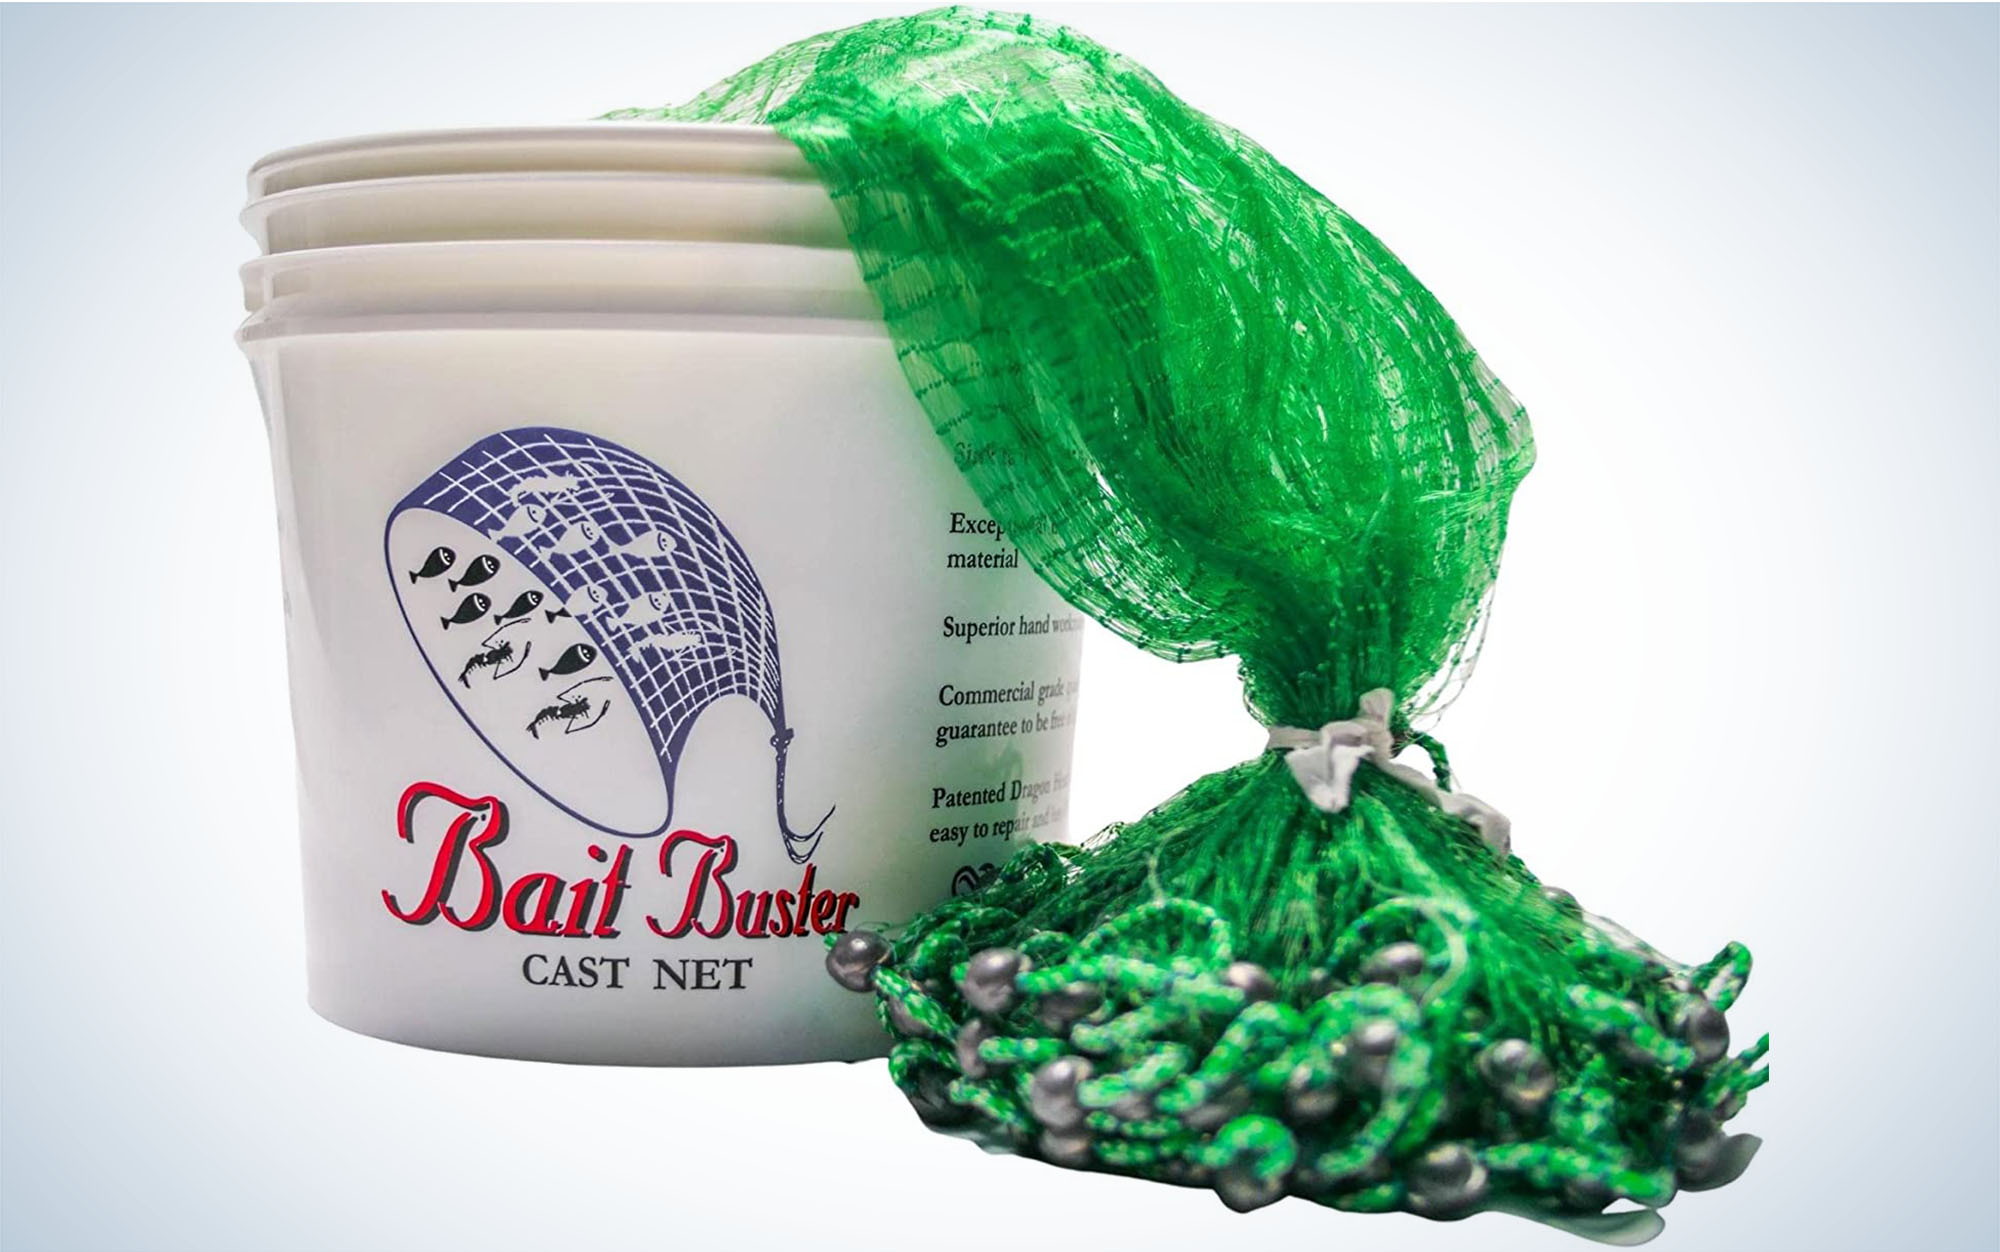 The Bait Buster net can help you catch the best live bait for crappie.